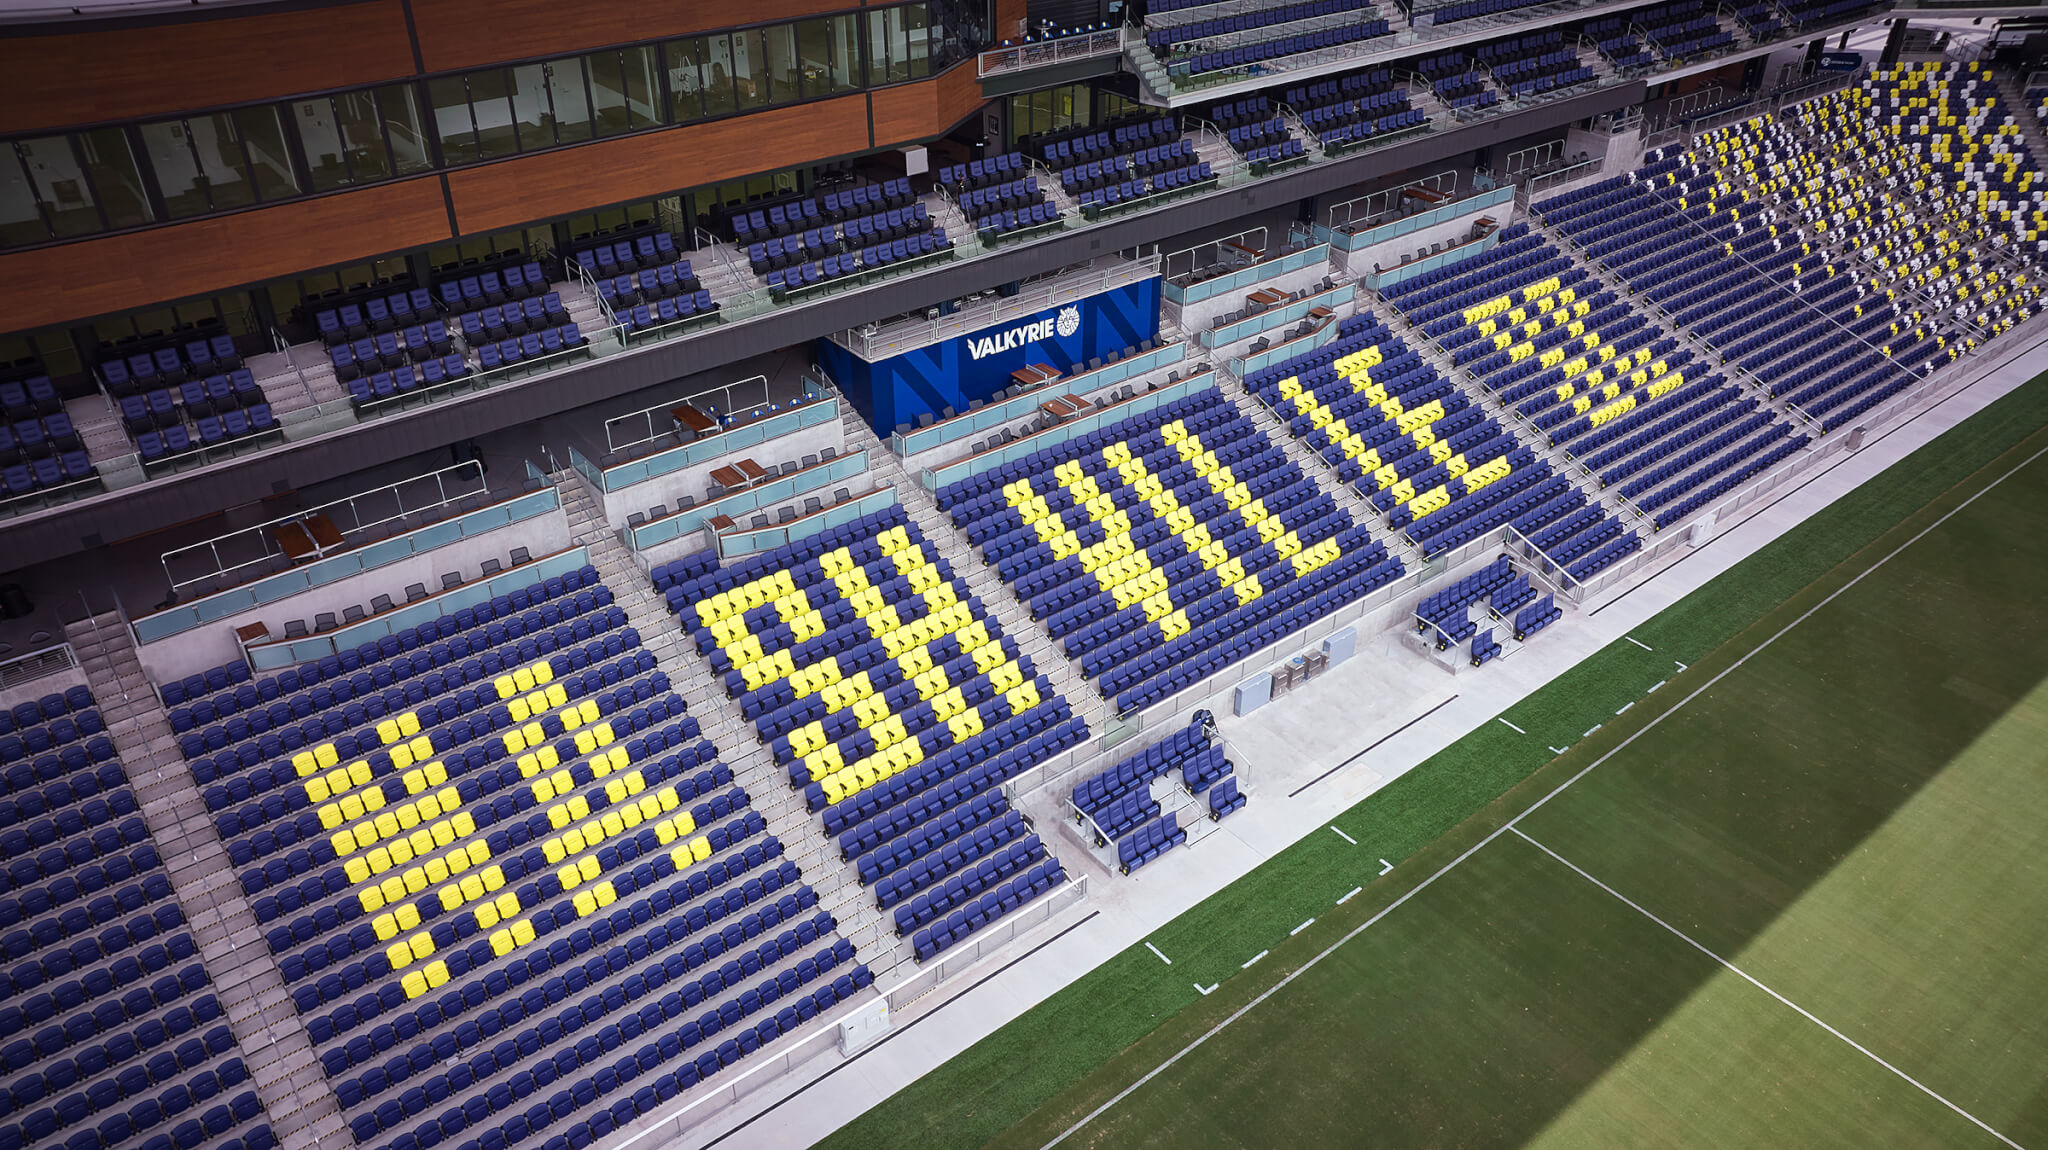 overhead view of seating at a soccer stadium with NASHVILLE SC spelled out in yellow